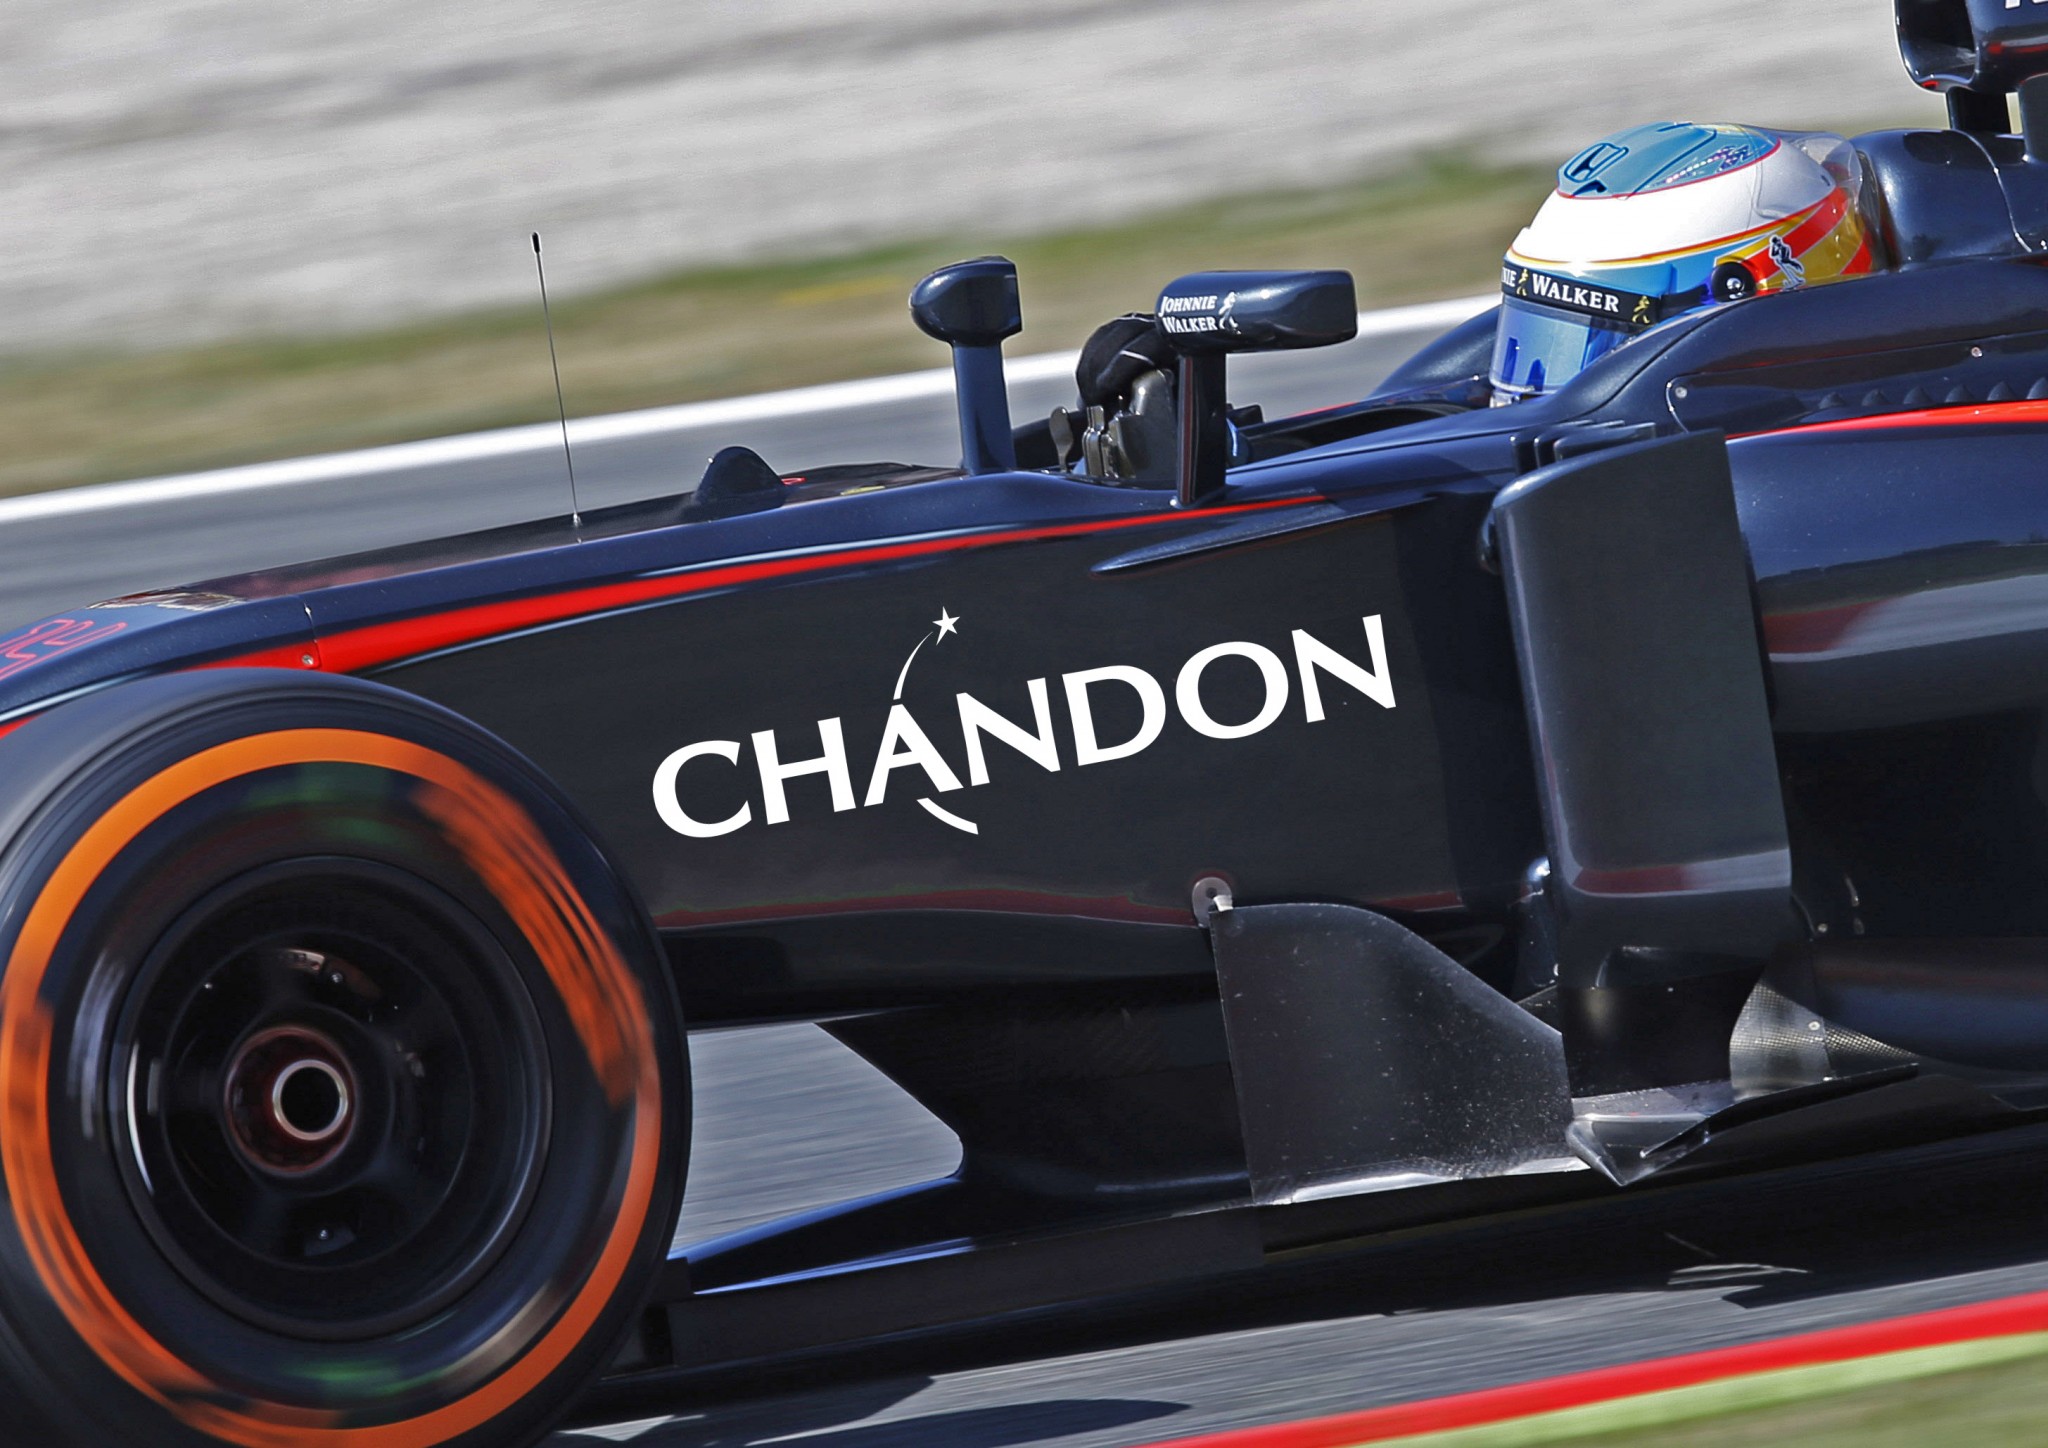 Chandon - Car Chassis side_L4R5506